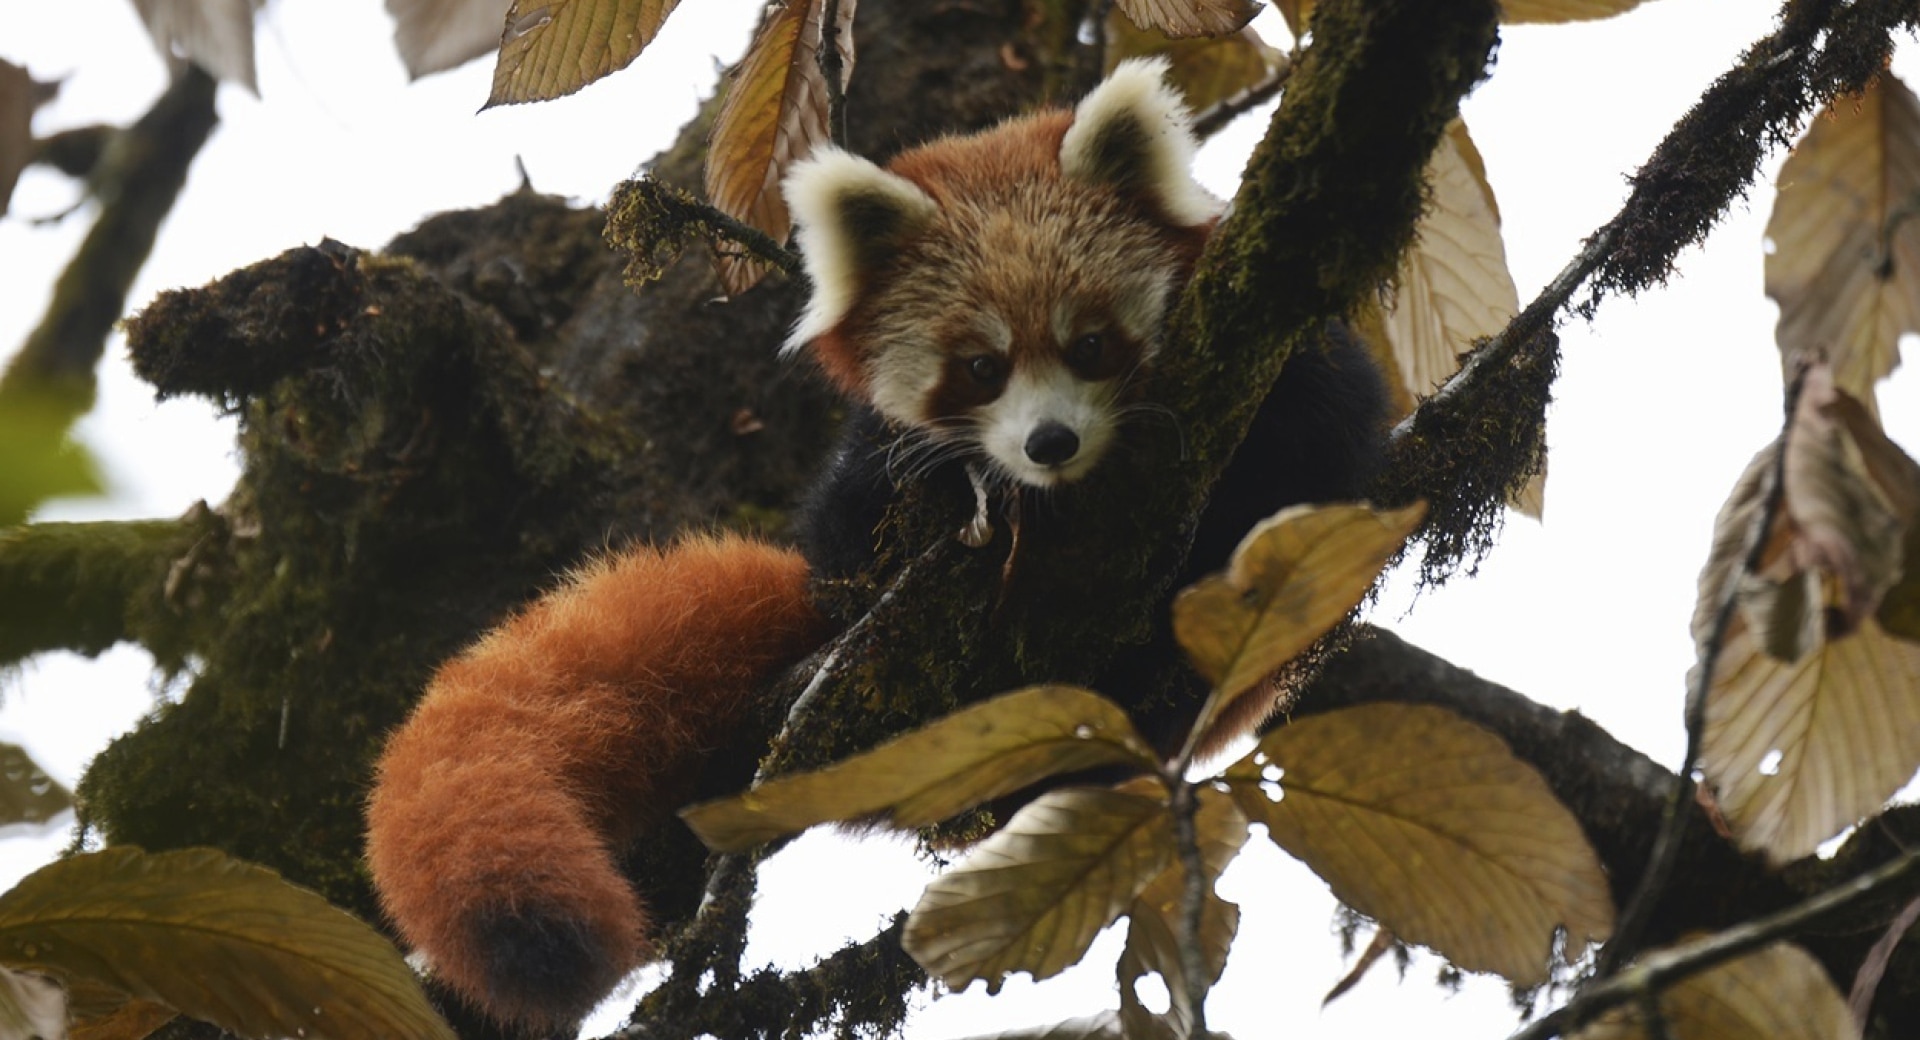 Goth-Stay Tourism is Good for People and Red Pandas